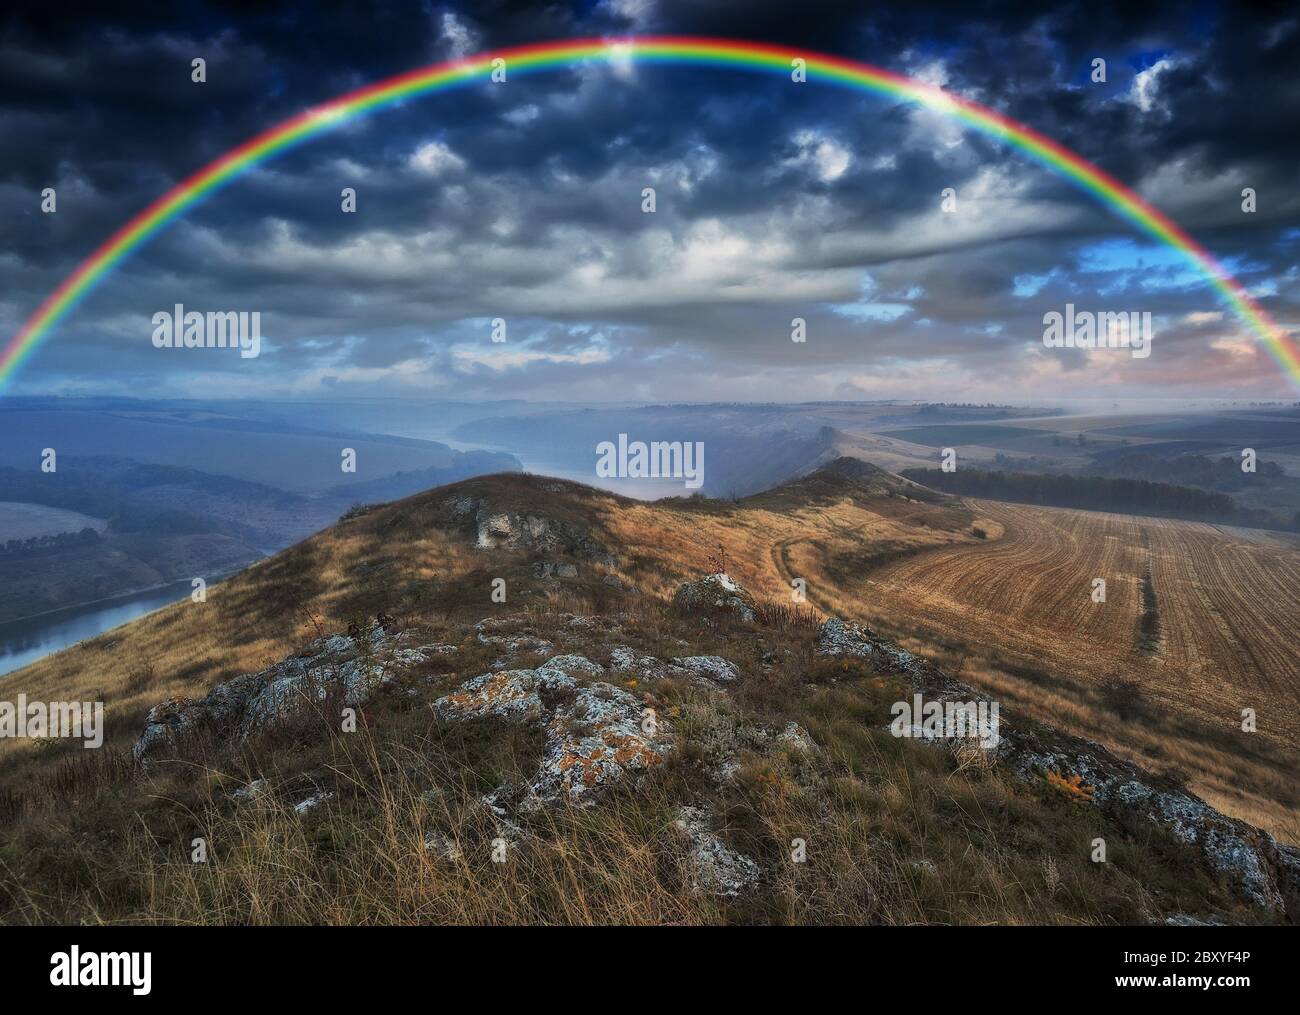 Rainbow with clouds over a rock Stock Photo